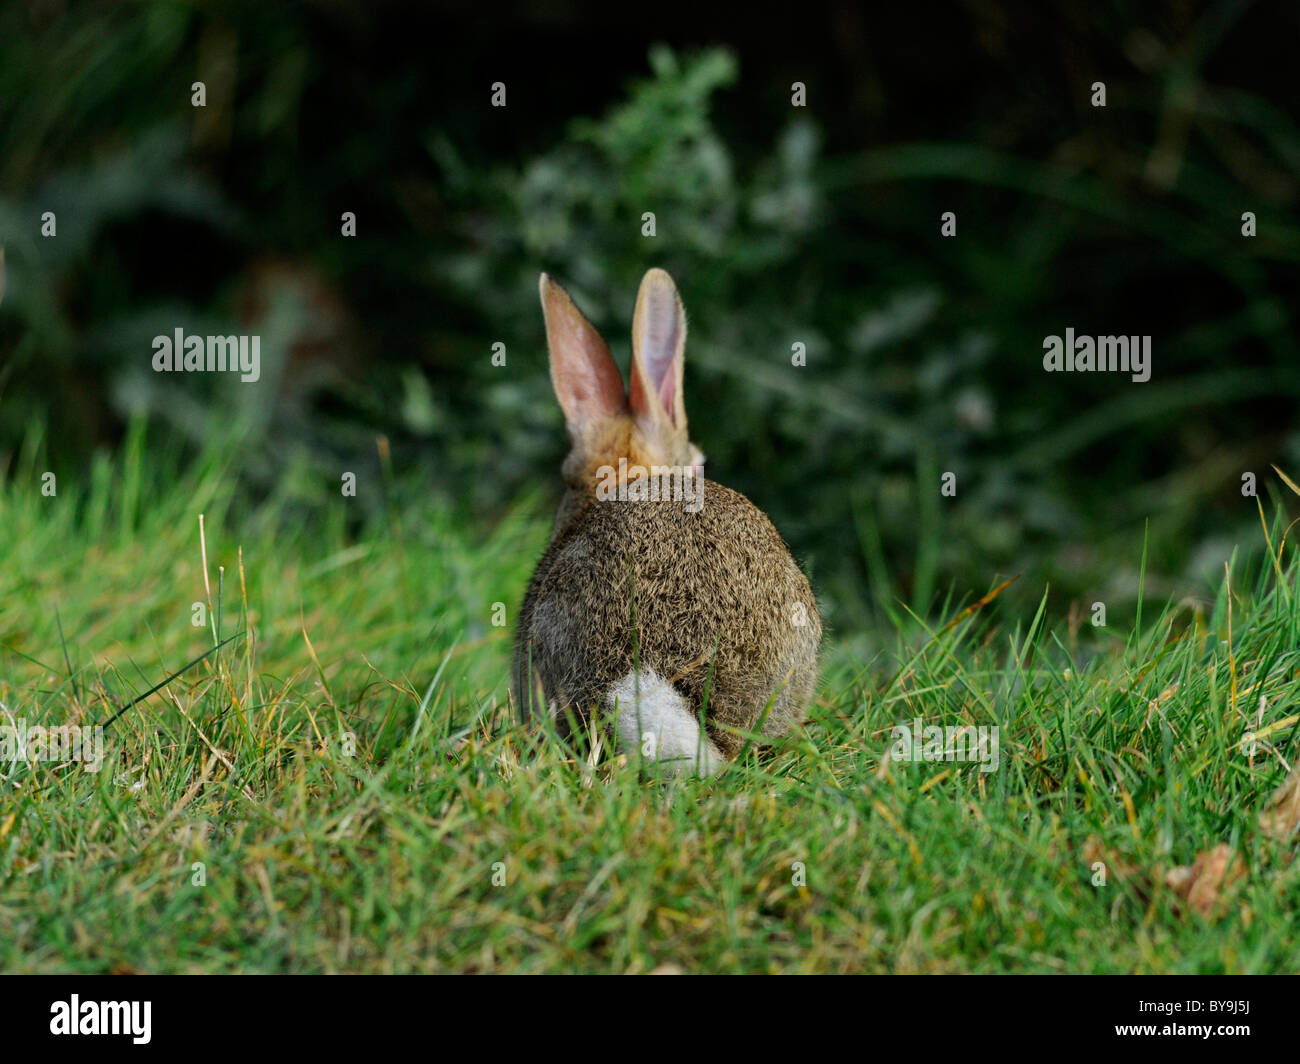 A cute baby rabbit showing his white bunny tail. Stock Photo